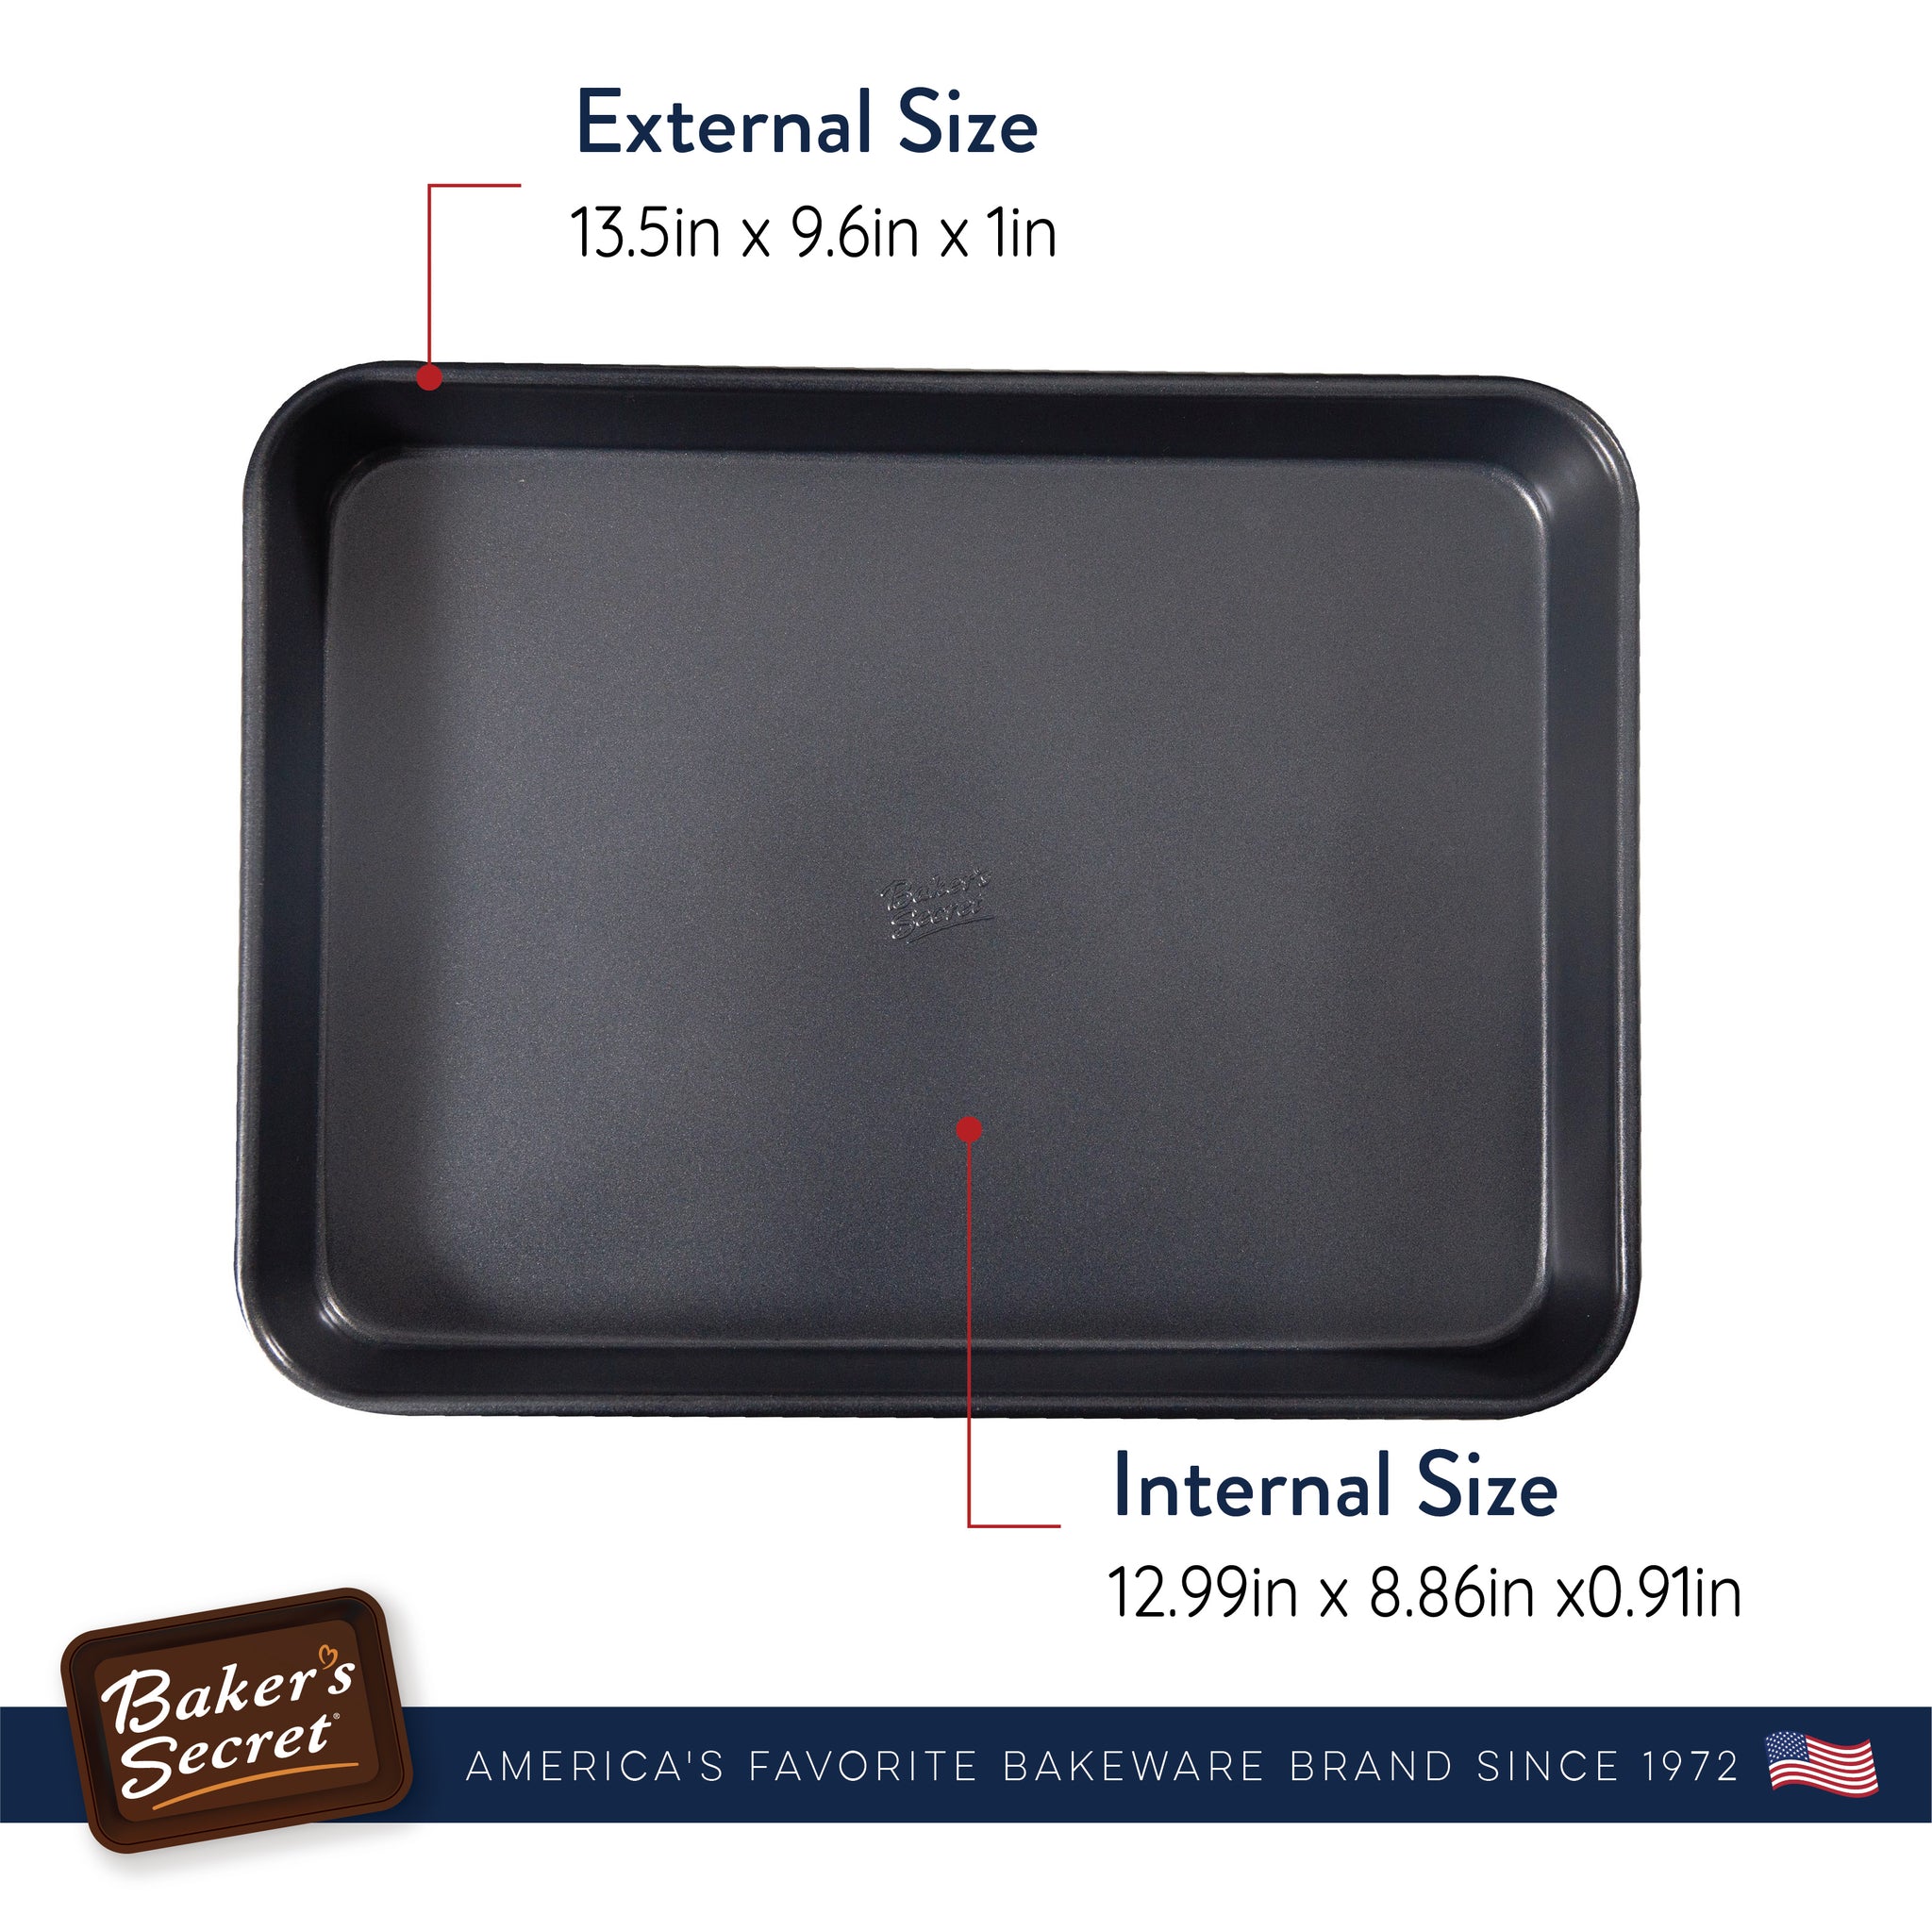 Baker's Secret Nonstick Large Cookie Sheet 18 x 13, Aluminized Steel Large  Size Cookie Tray Jelly Roll with 2 Layers Non-stick Coating, Bakeware Baking  Accessories - Superb Collection